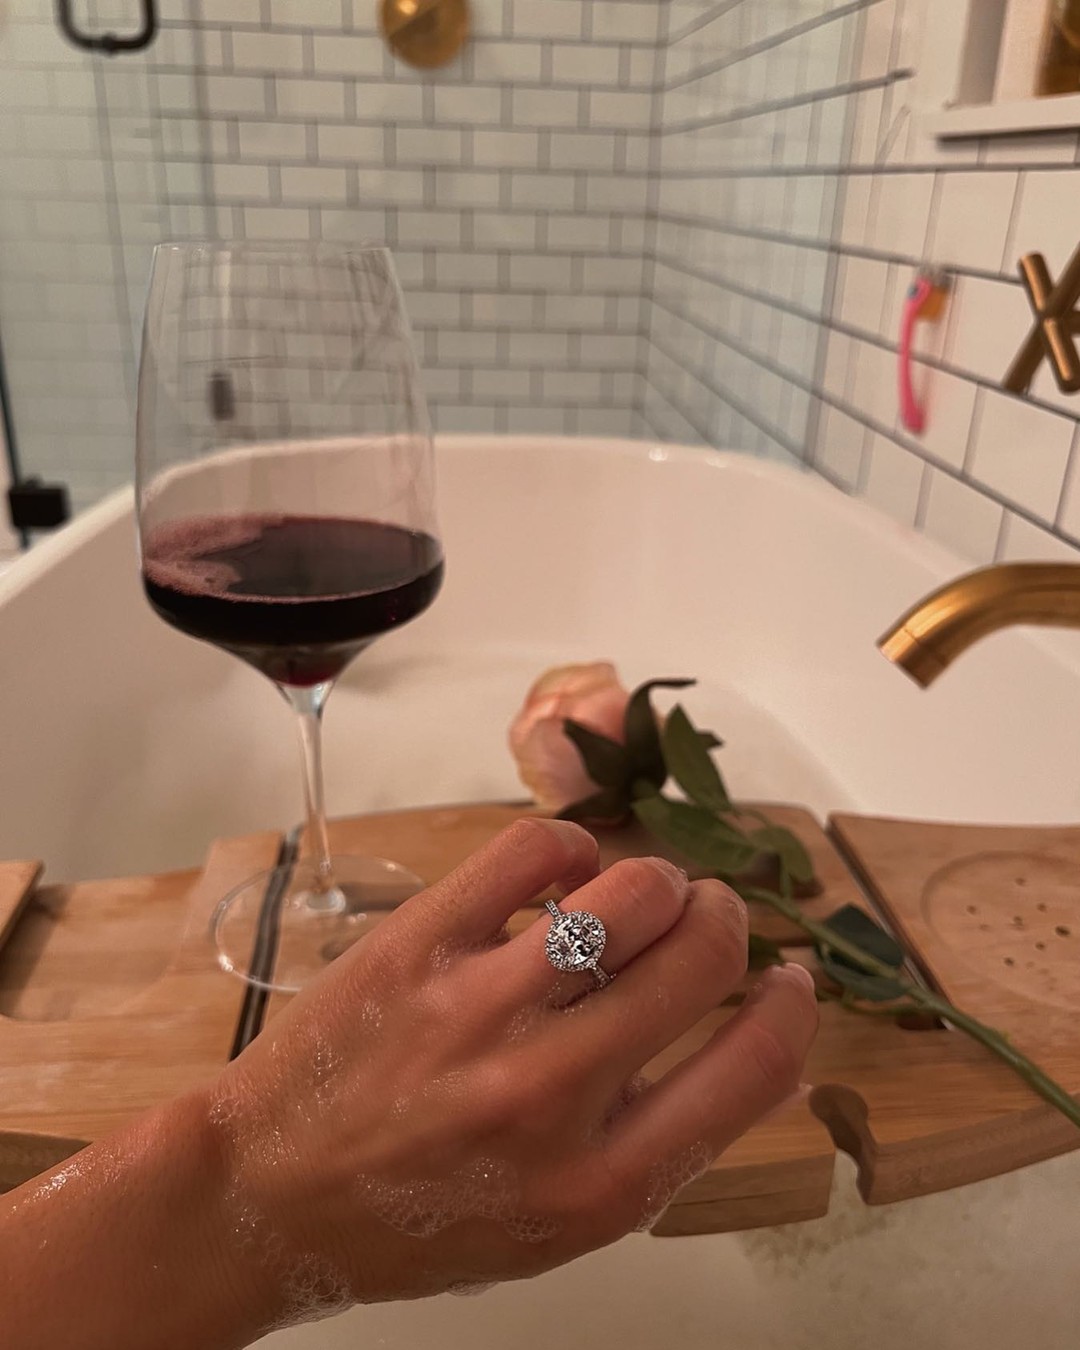 Our kind of weekend plans:
💍 + 🍷 + 🛁 = ❤️
💍ring: Classic Cathedral Halo Pavé Engagement Ring
.
.
.
#jamesallen #jamesallenrings #diamond #diamonds #diamondring #engaged #engagement #engagementring #isaidyes #ringinspo #weekend #weekendstyle #winter #winterengagement